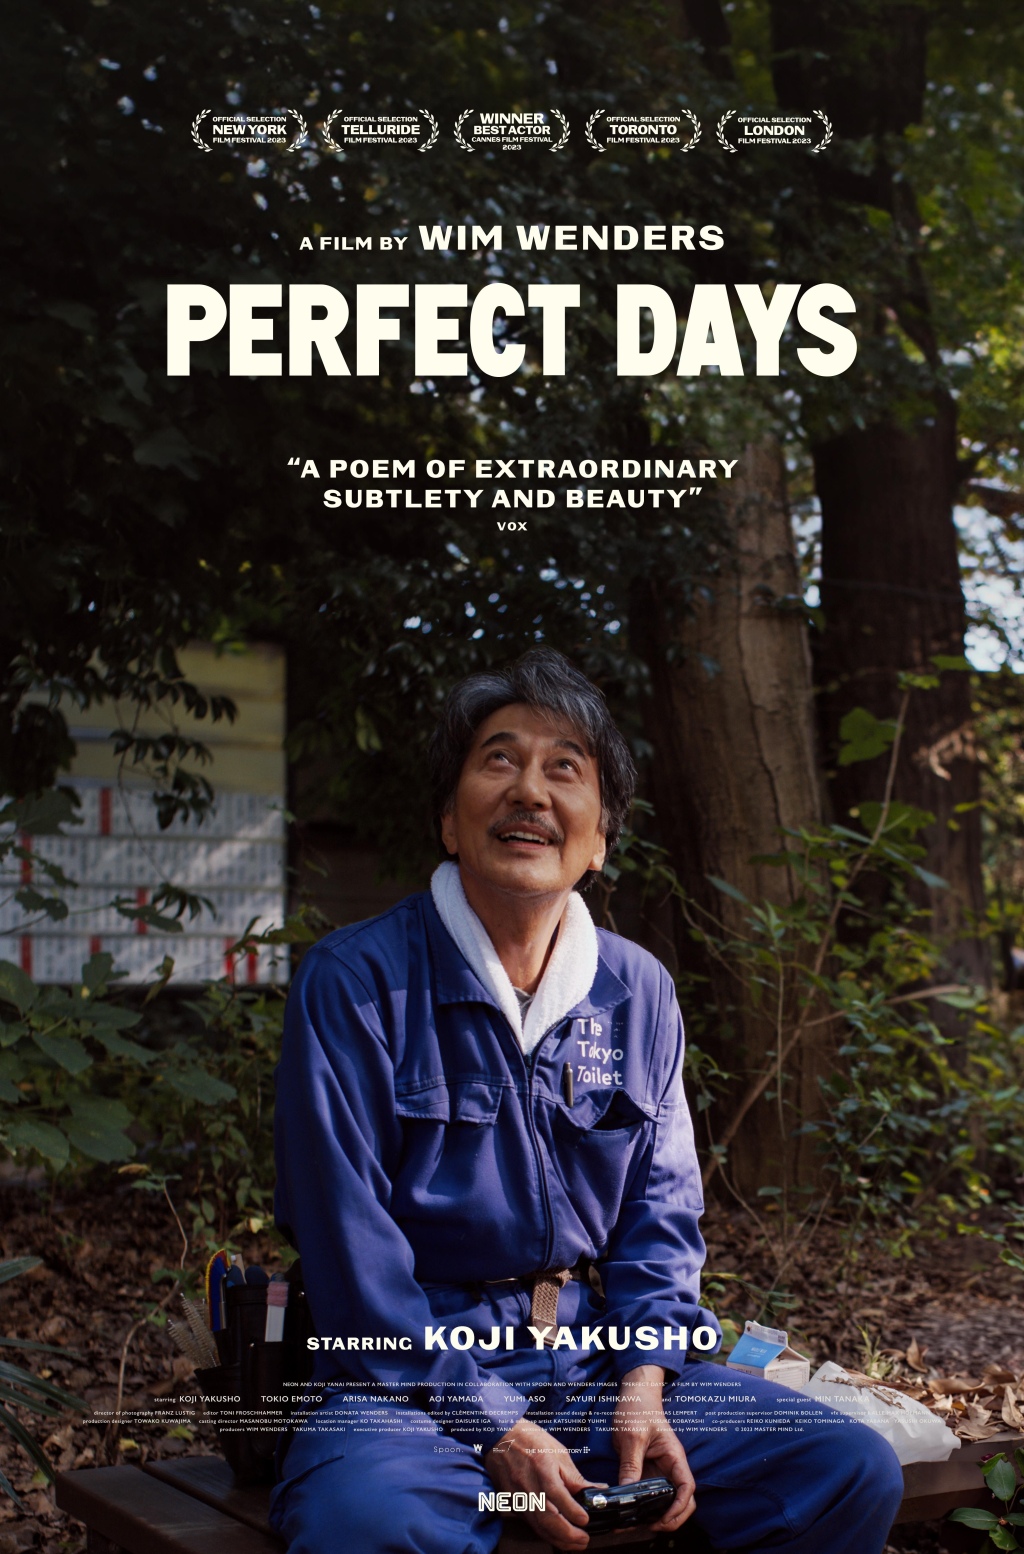 Perfect days, Wim Wenders